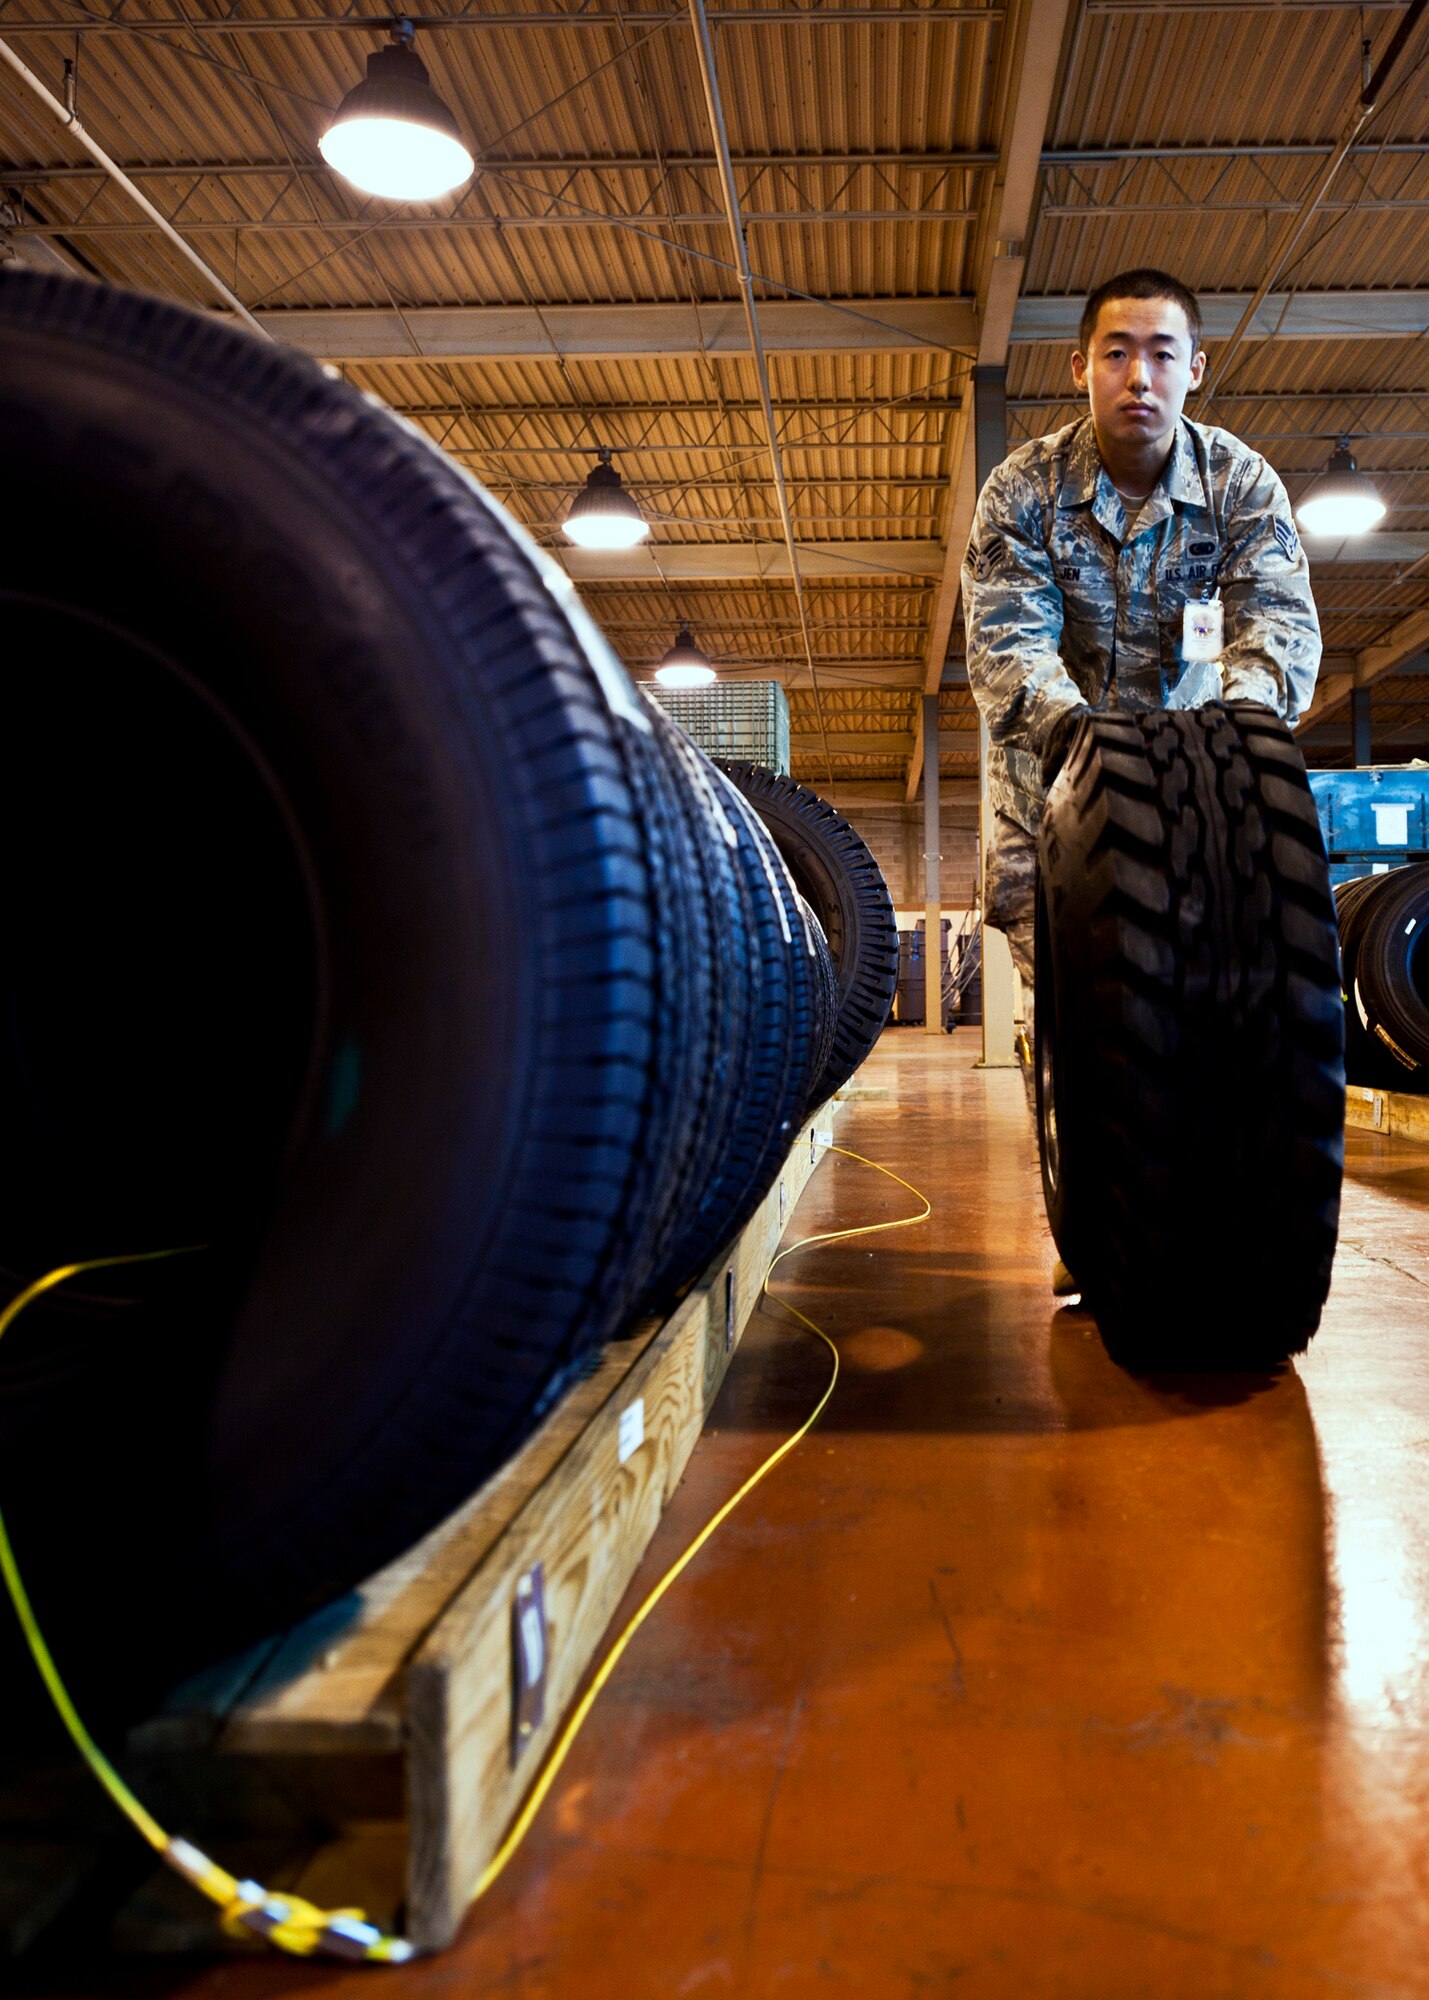 Senior Airman Ching Jen, 96th Materiel Management Flight, moves one of many tires through Eglin's supply warehouse.  Eglin's materiel management flight is the largest supply flight in the U.S.  Approximately 125 military and civilian personnel manage more than 50,000 items valued at $875 million.  They also manage more than 300 nonexpendable equipment accounts tracking more than $700 million in assets spread across Eglin and other locations. The materiel management flight is part of the 96th Logistics Readiness Squadron.  (U.S. Air Force photo/Samuel King Jr.)